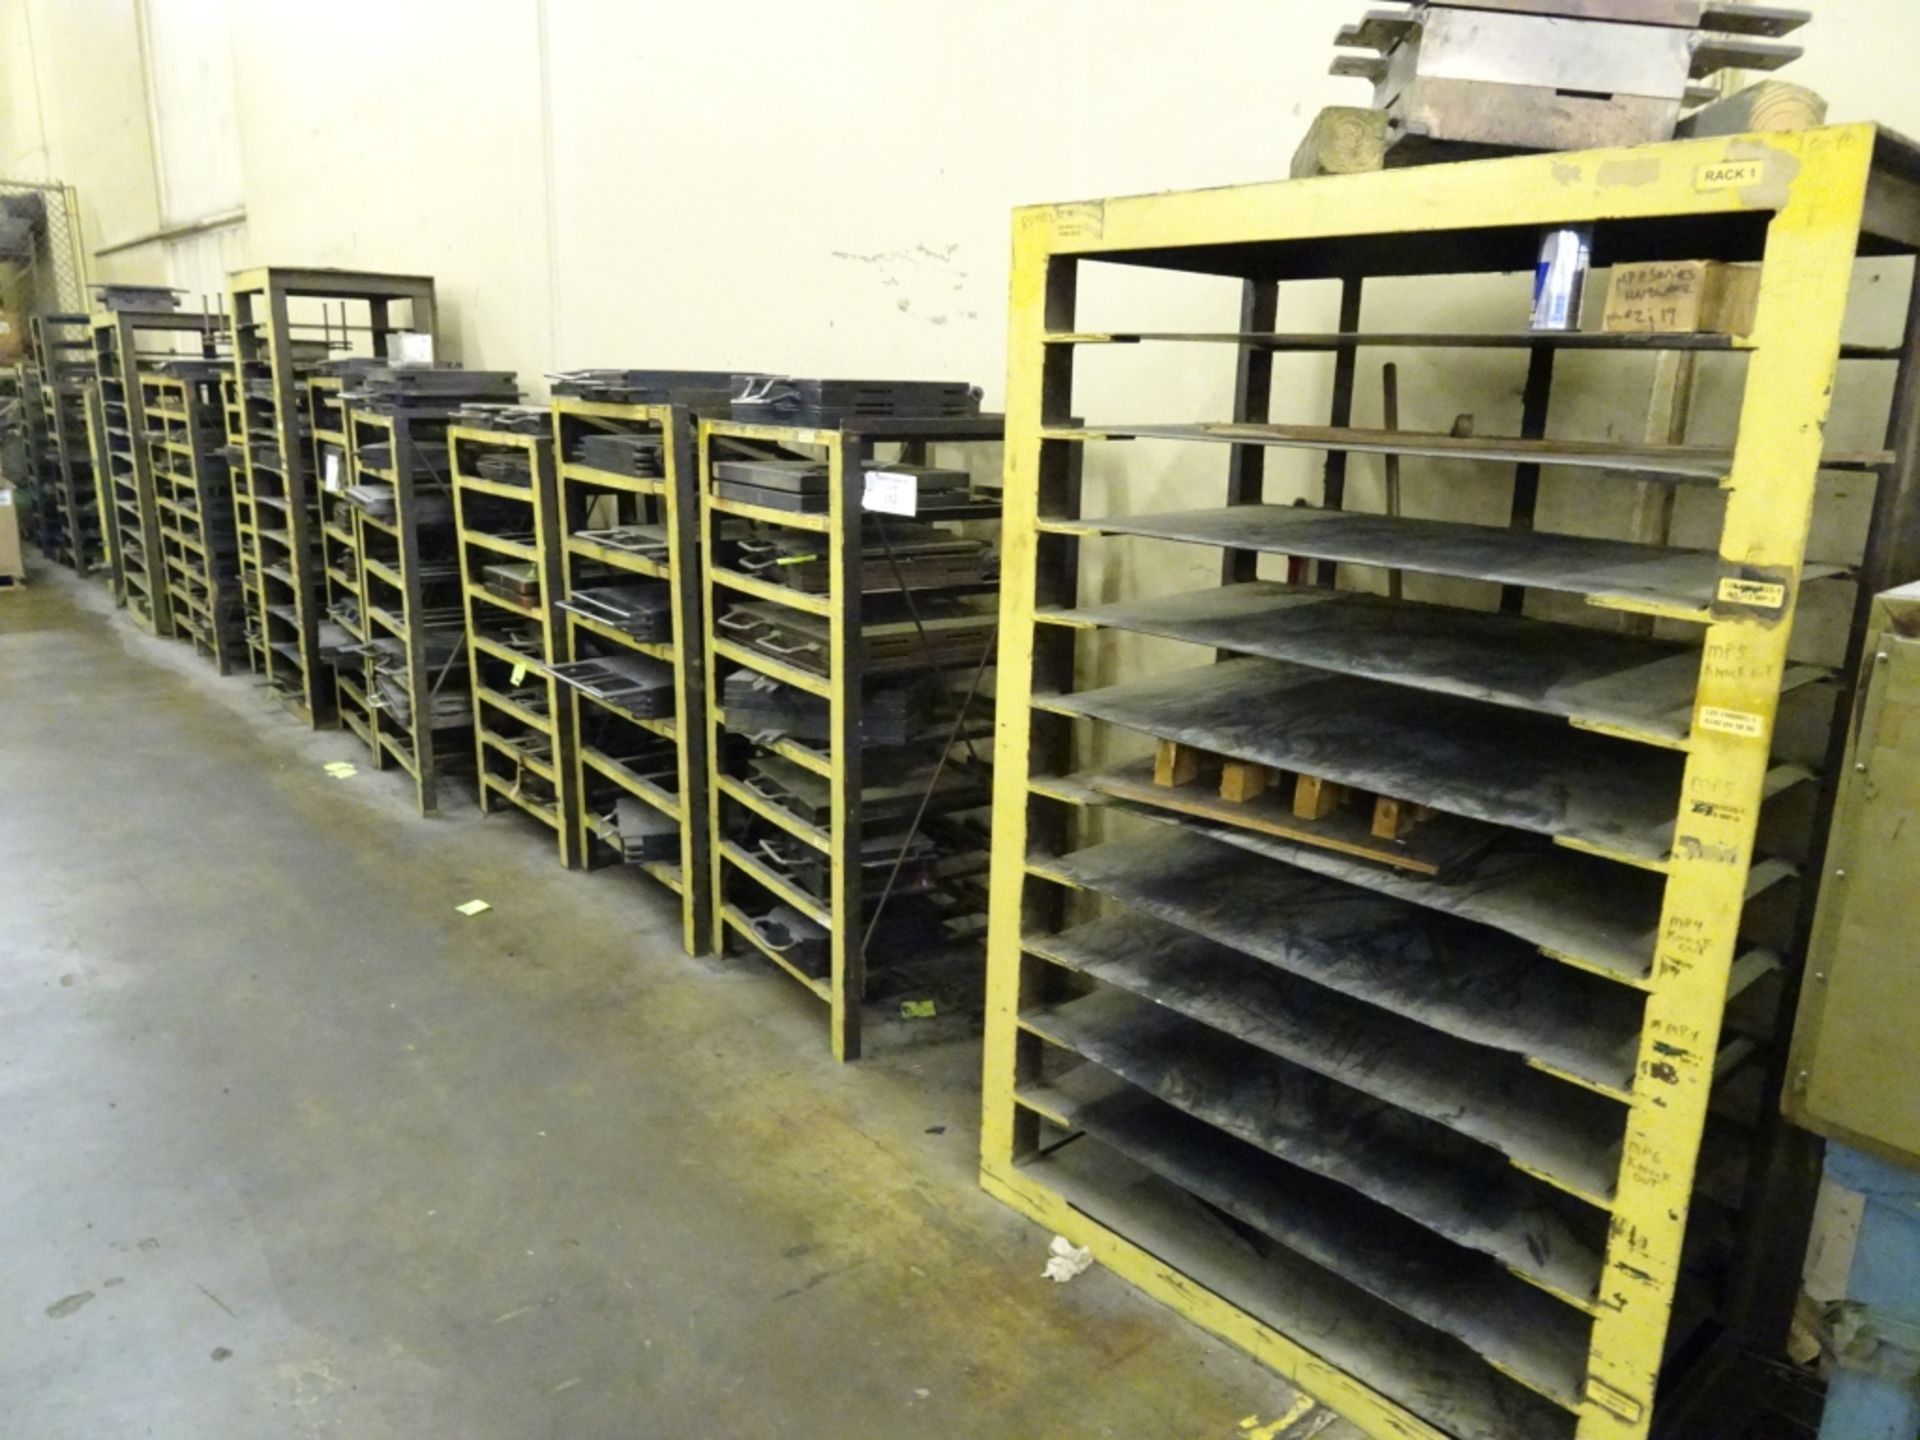 (14) Various Sized Heavy Duty Steel Mold Racks With No Contents